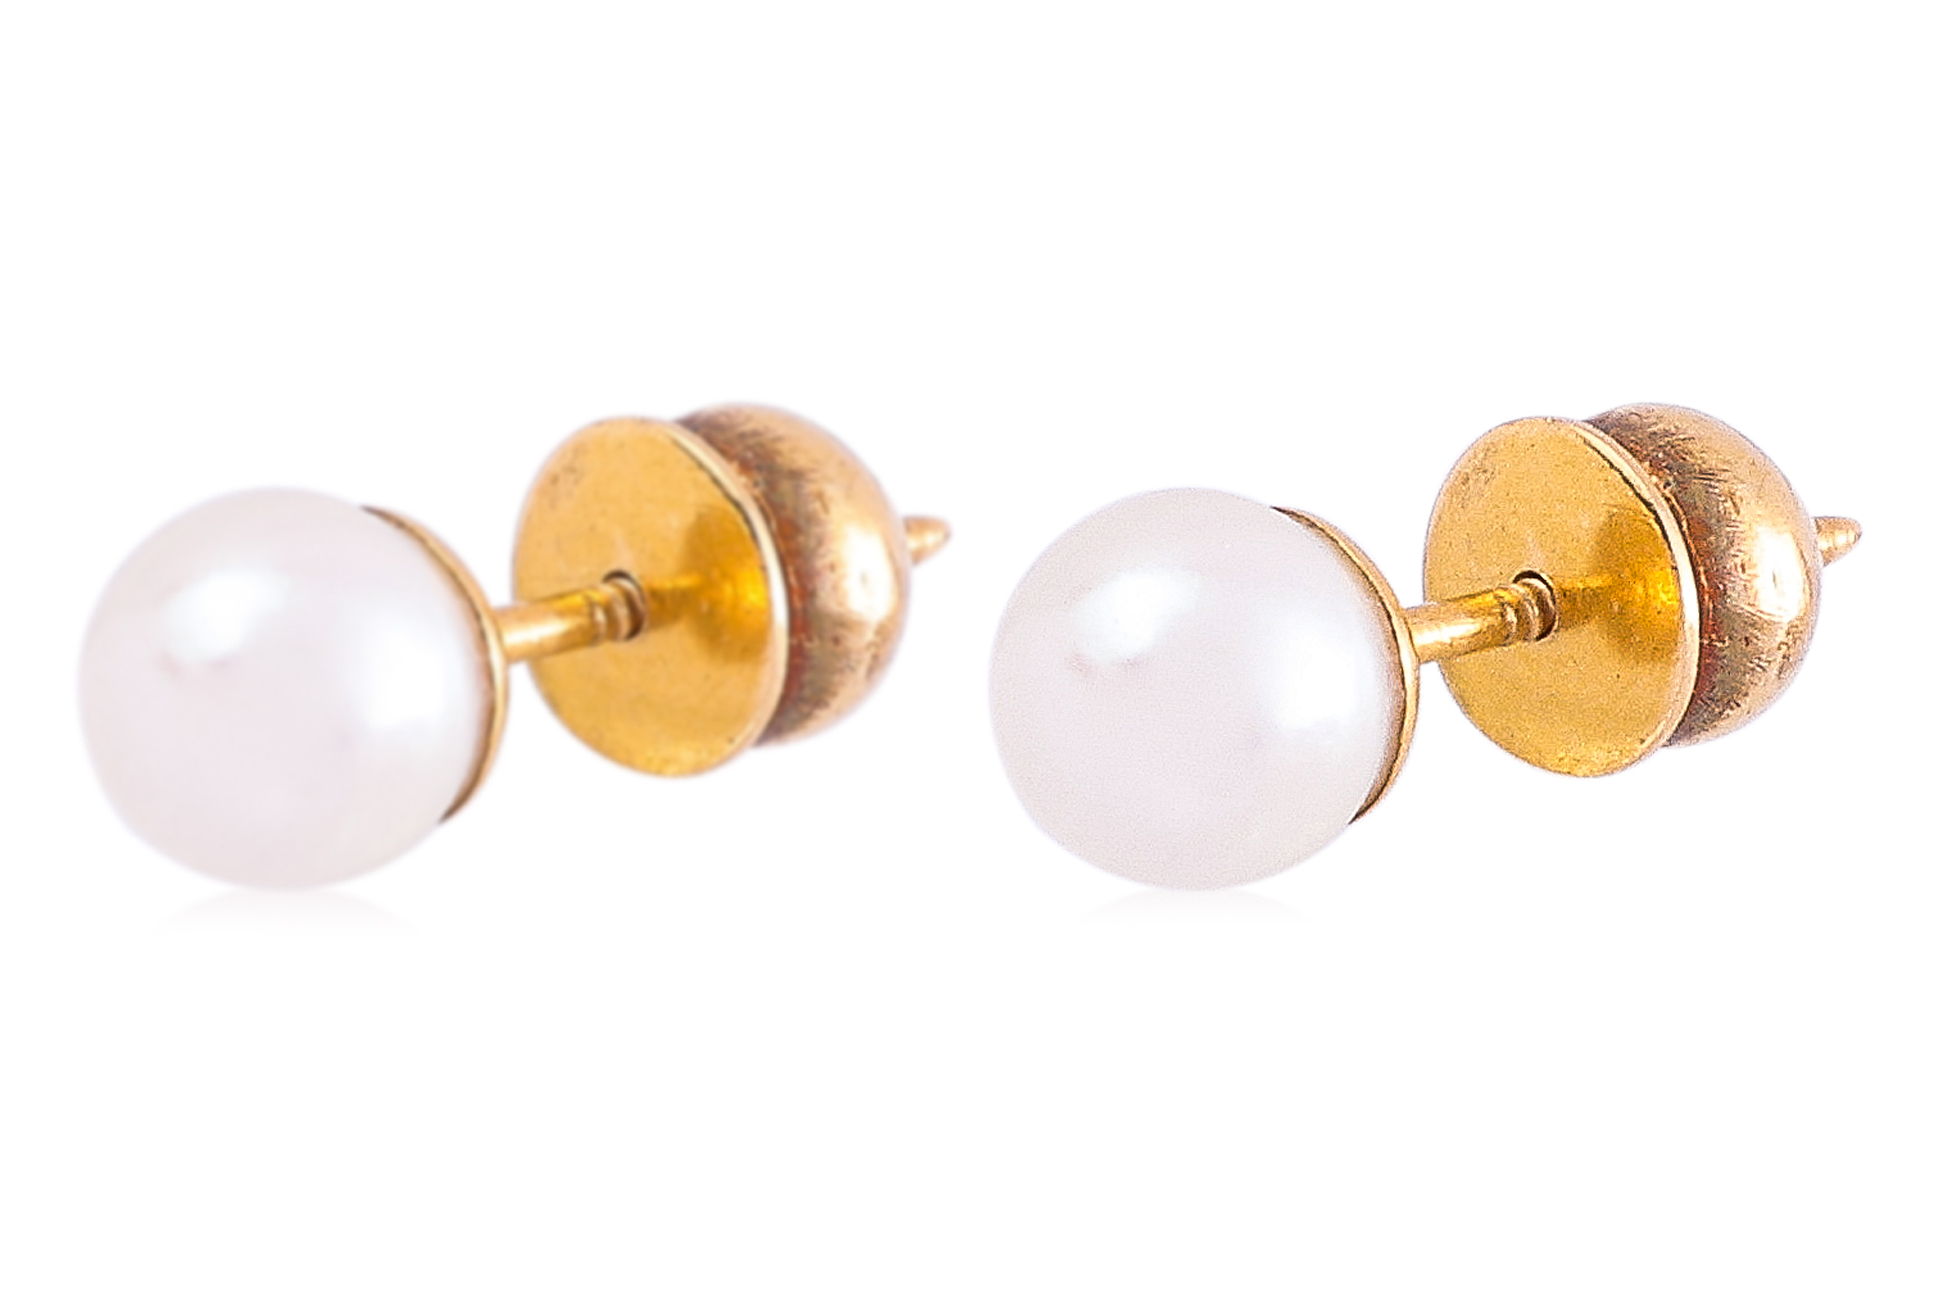 A SET OF CULTURED AKOYA PEARL JEWELLERY - Image 2 of 3